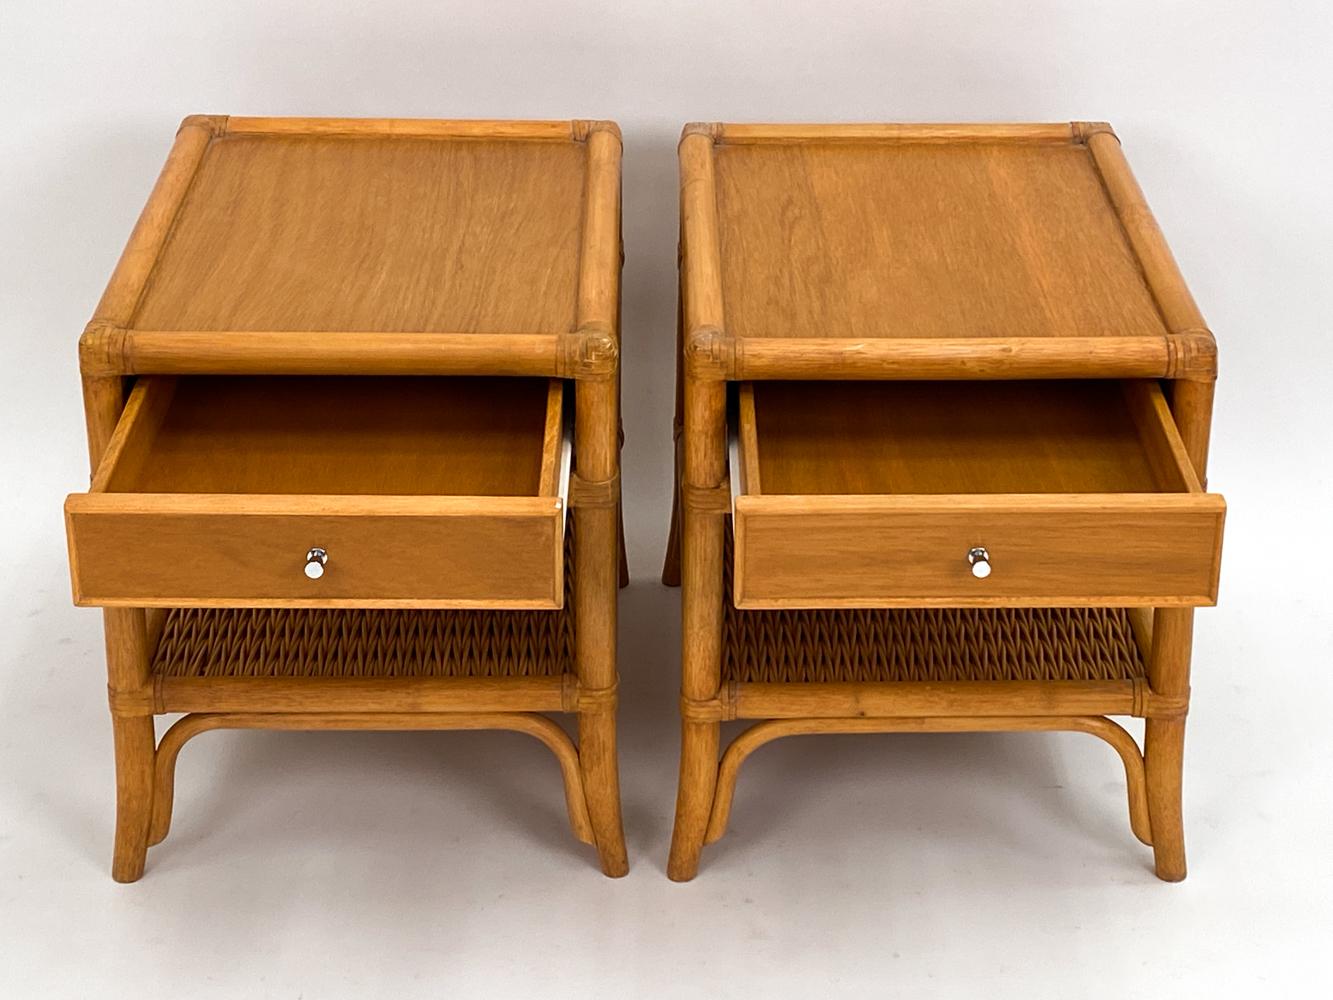 20th Century Pair of DUX Swedish Mid-Century Bamboo End Tables or Nightstands For Sale